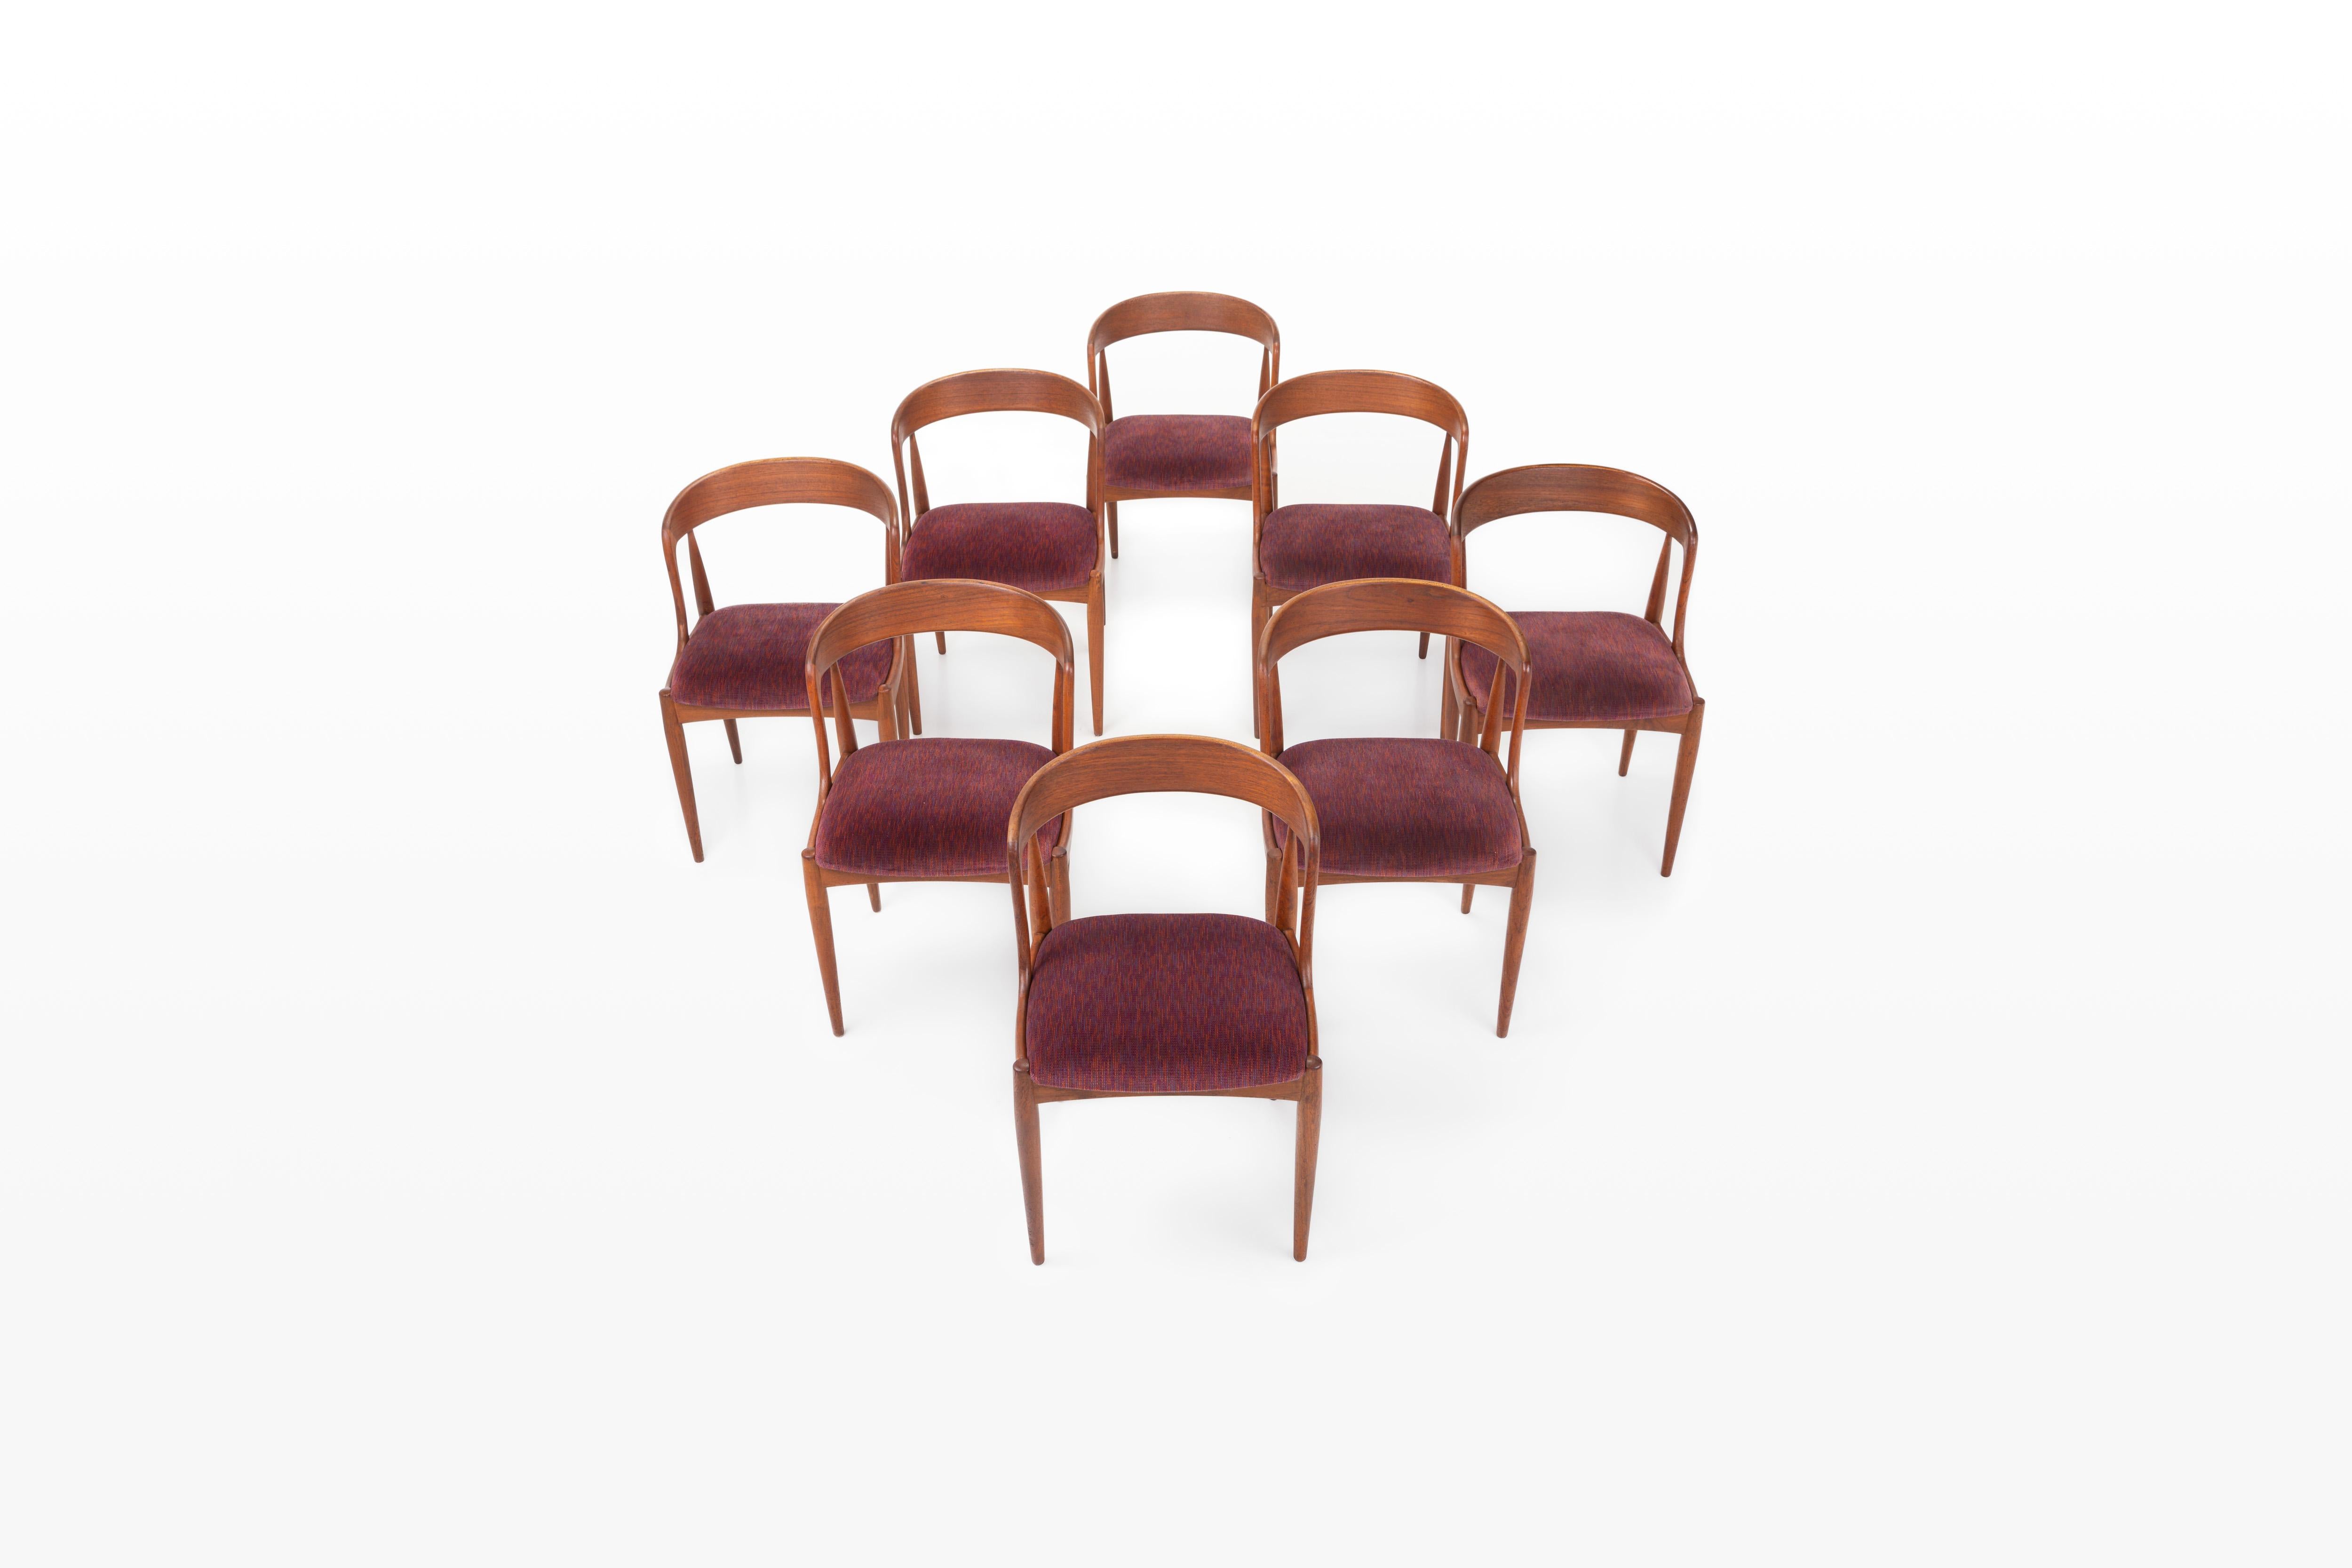 Set of eight vintage dining room chairs. These chairs are designed by Johannes Andersen for Uldum Møbelfabrik in Denmark. They have a teak frame and a red-purple seat. The chairs are in very good condition.

Dimensions:
W: 50 cm
D: 52 cm
H: 74 cm